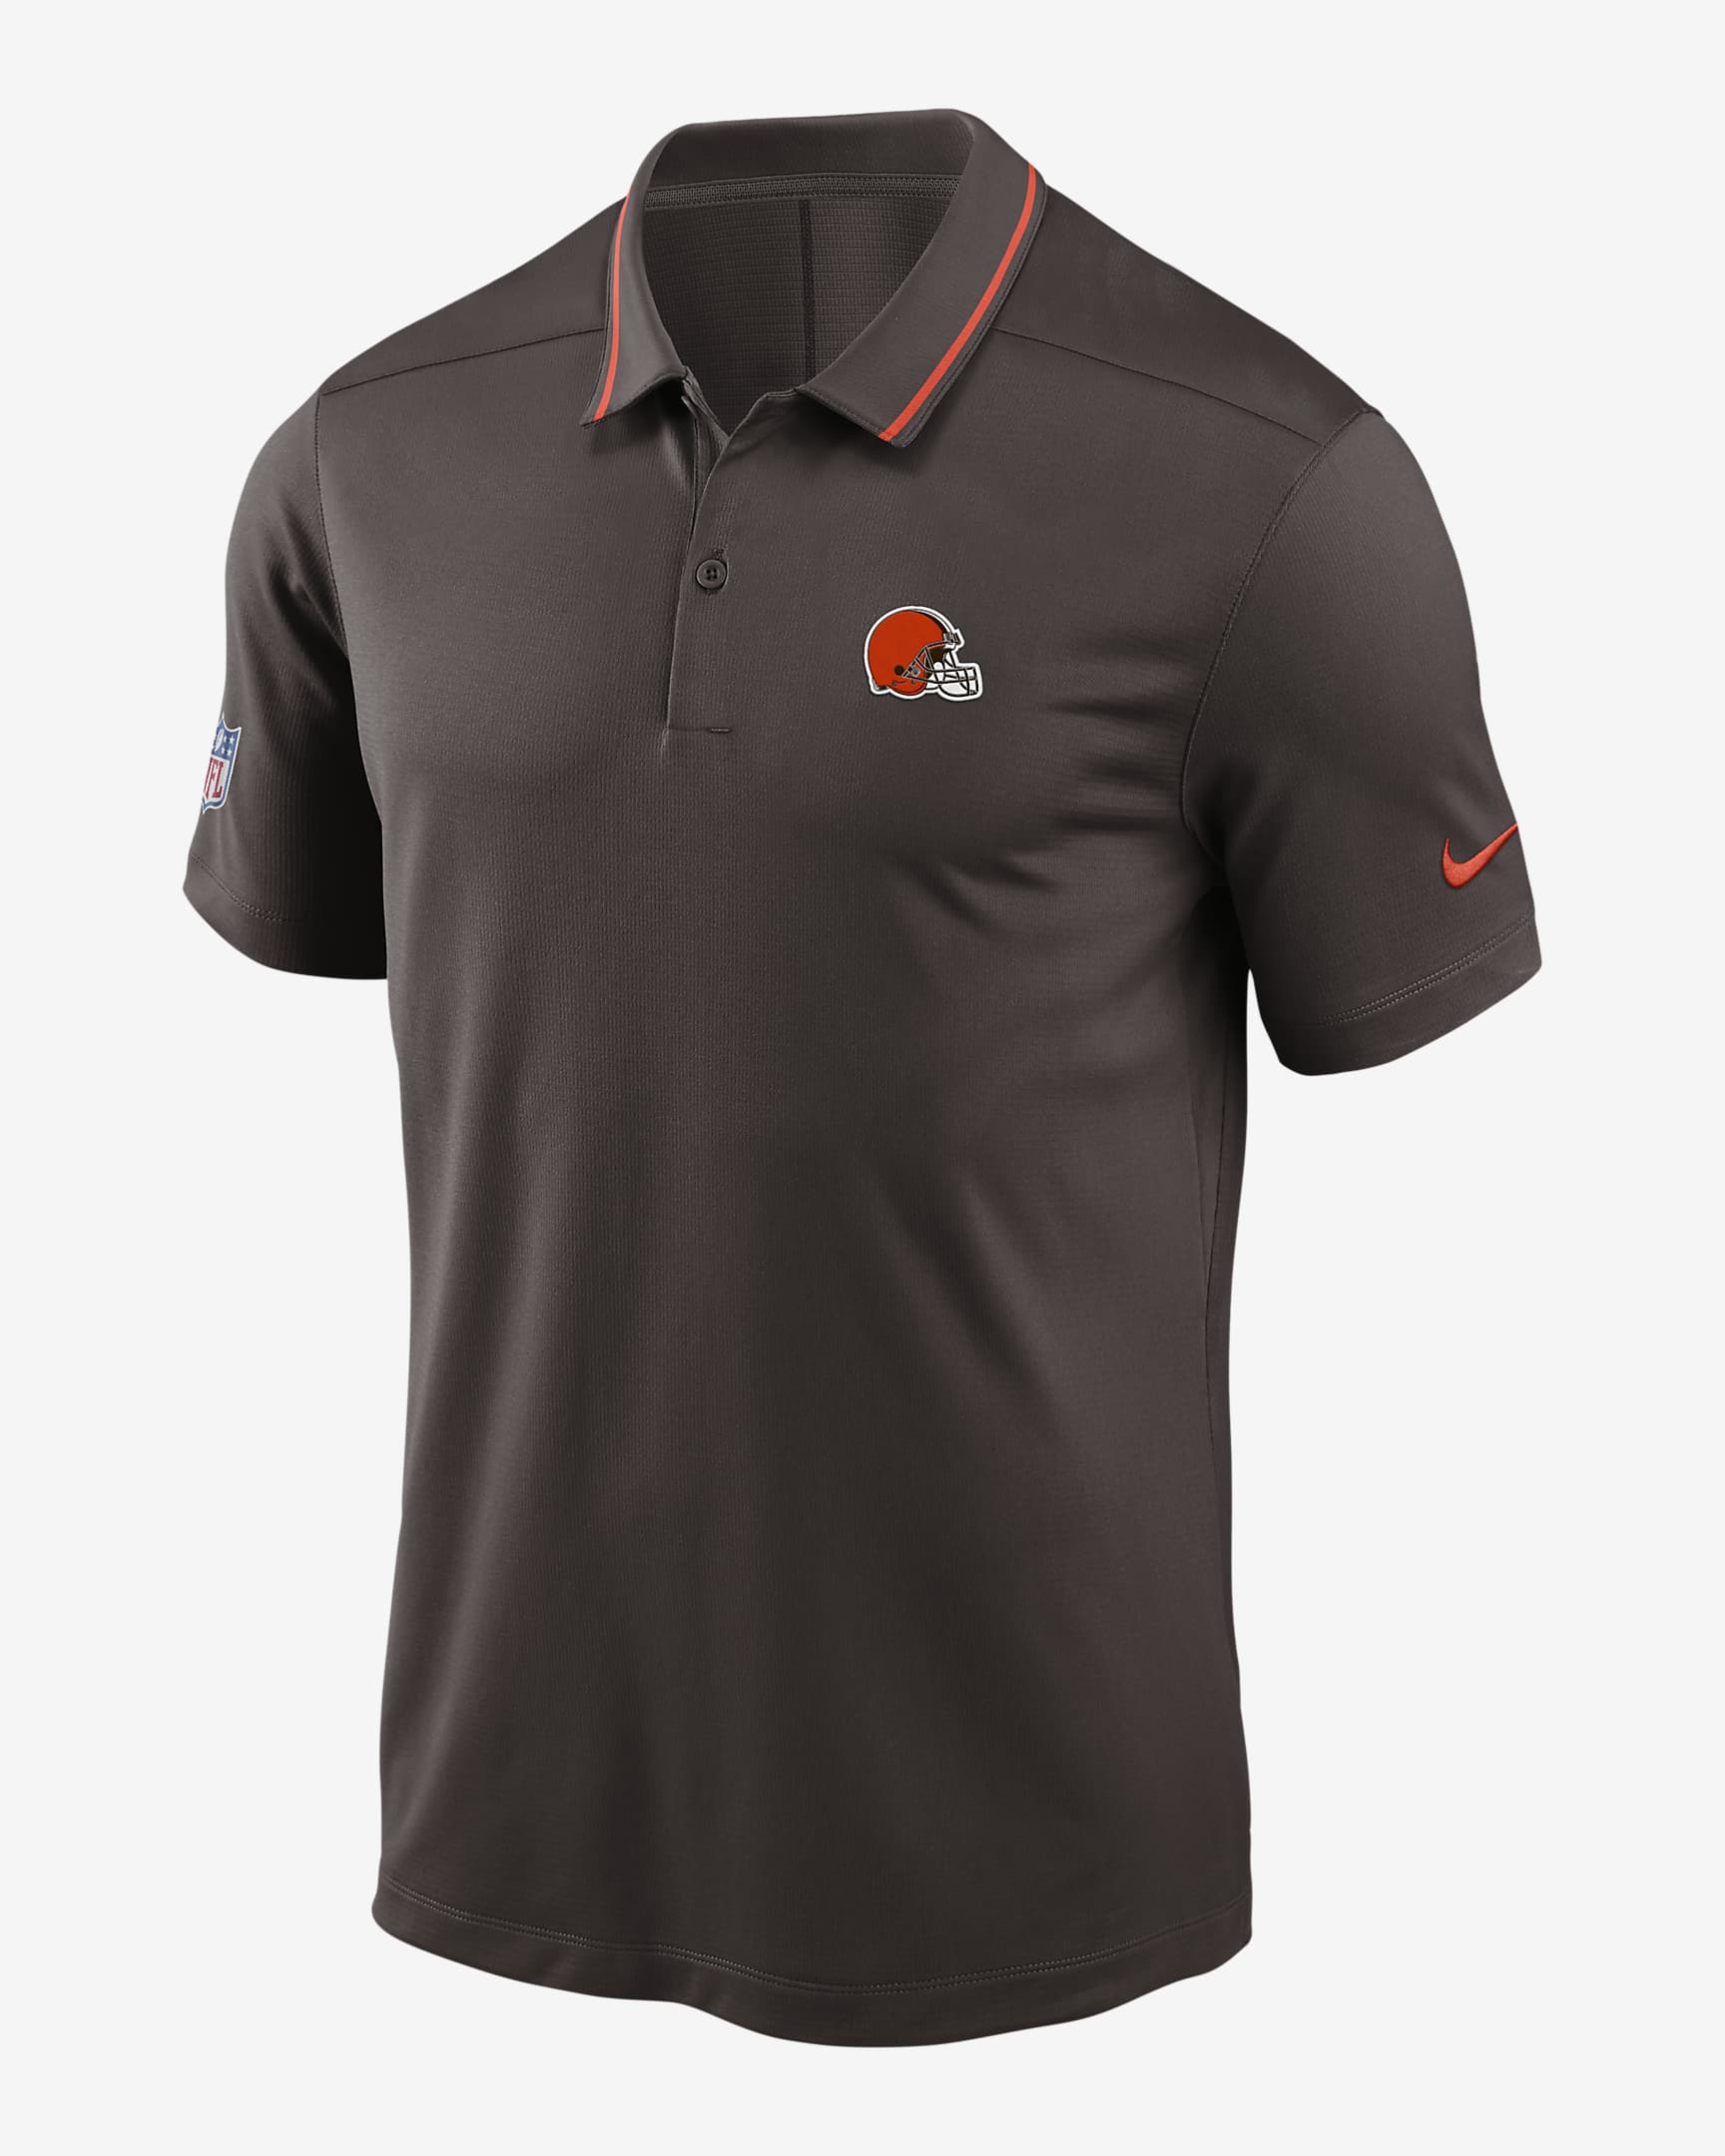 Nike Dri-FIT Sideline Victory (NFL Cleveland Browns) Men's Polo. Nike.com